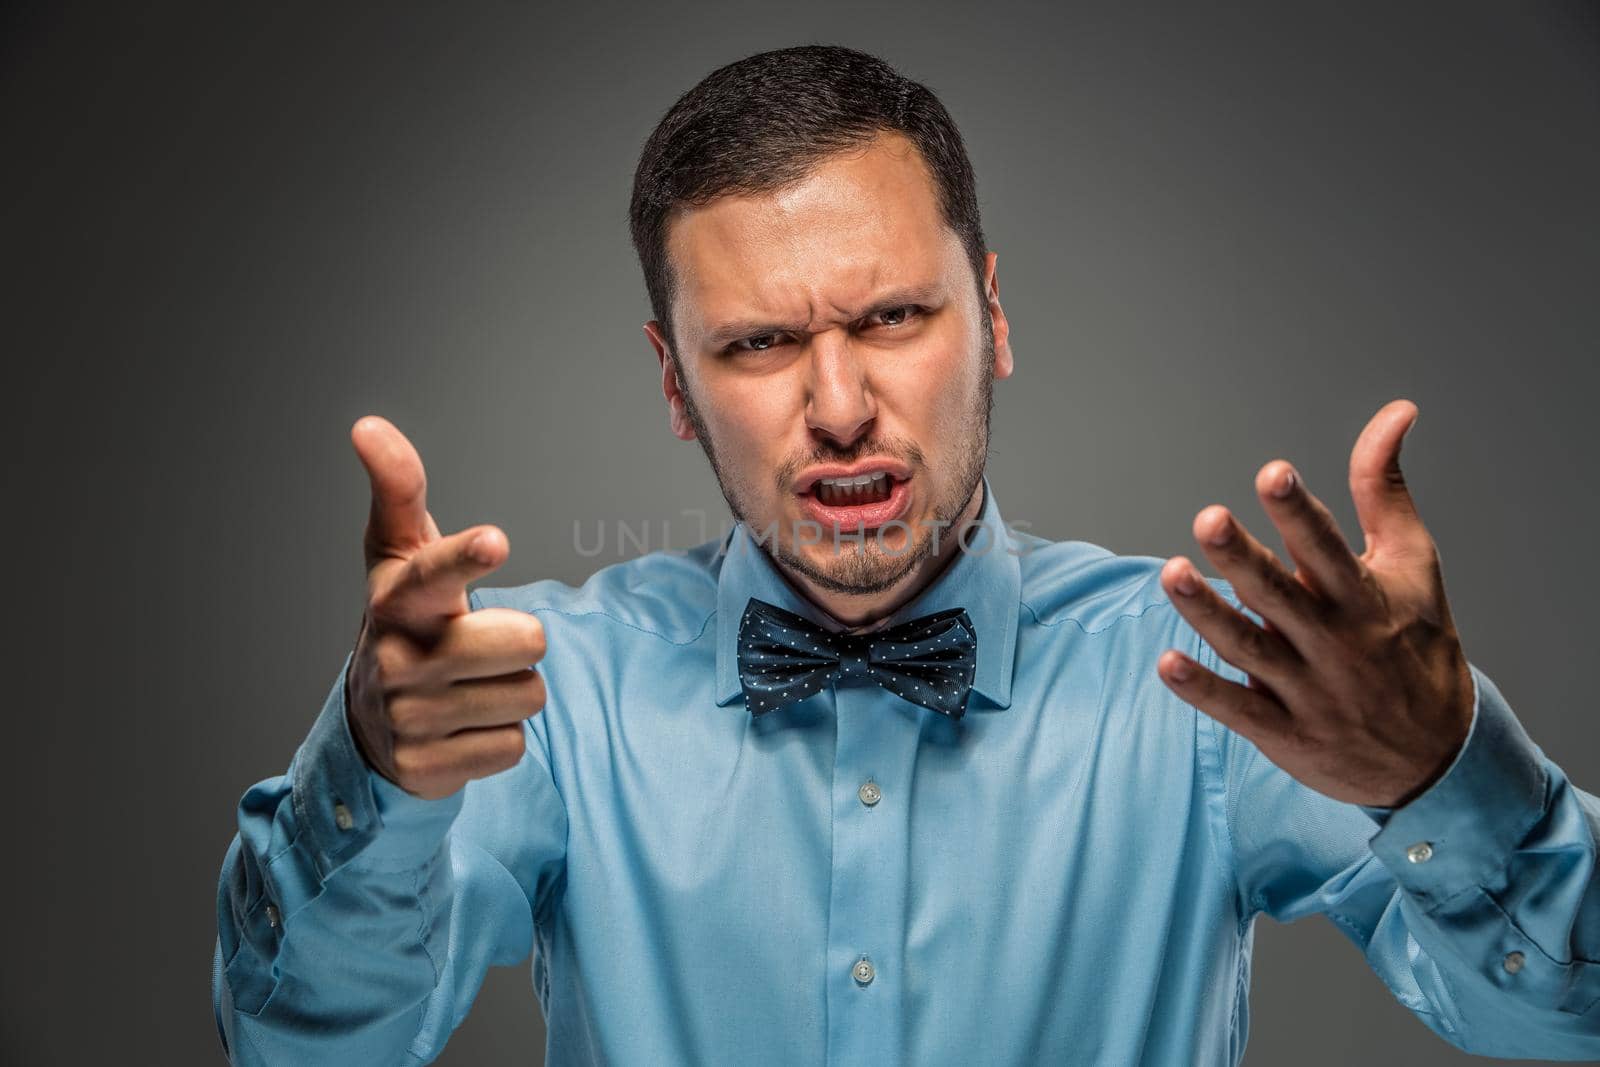 Portrait of angry upset young man in blue shirt and butterfly tie with hands up, pointing finger at camera, isolated on gray background. Negative human emotion, facial expression. Closeup